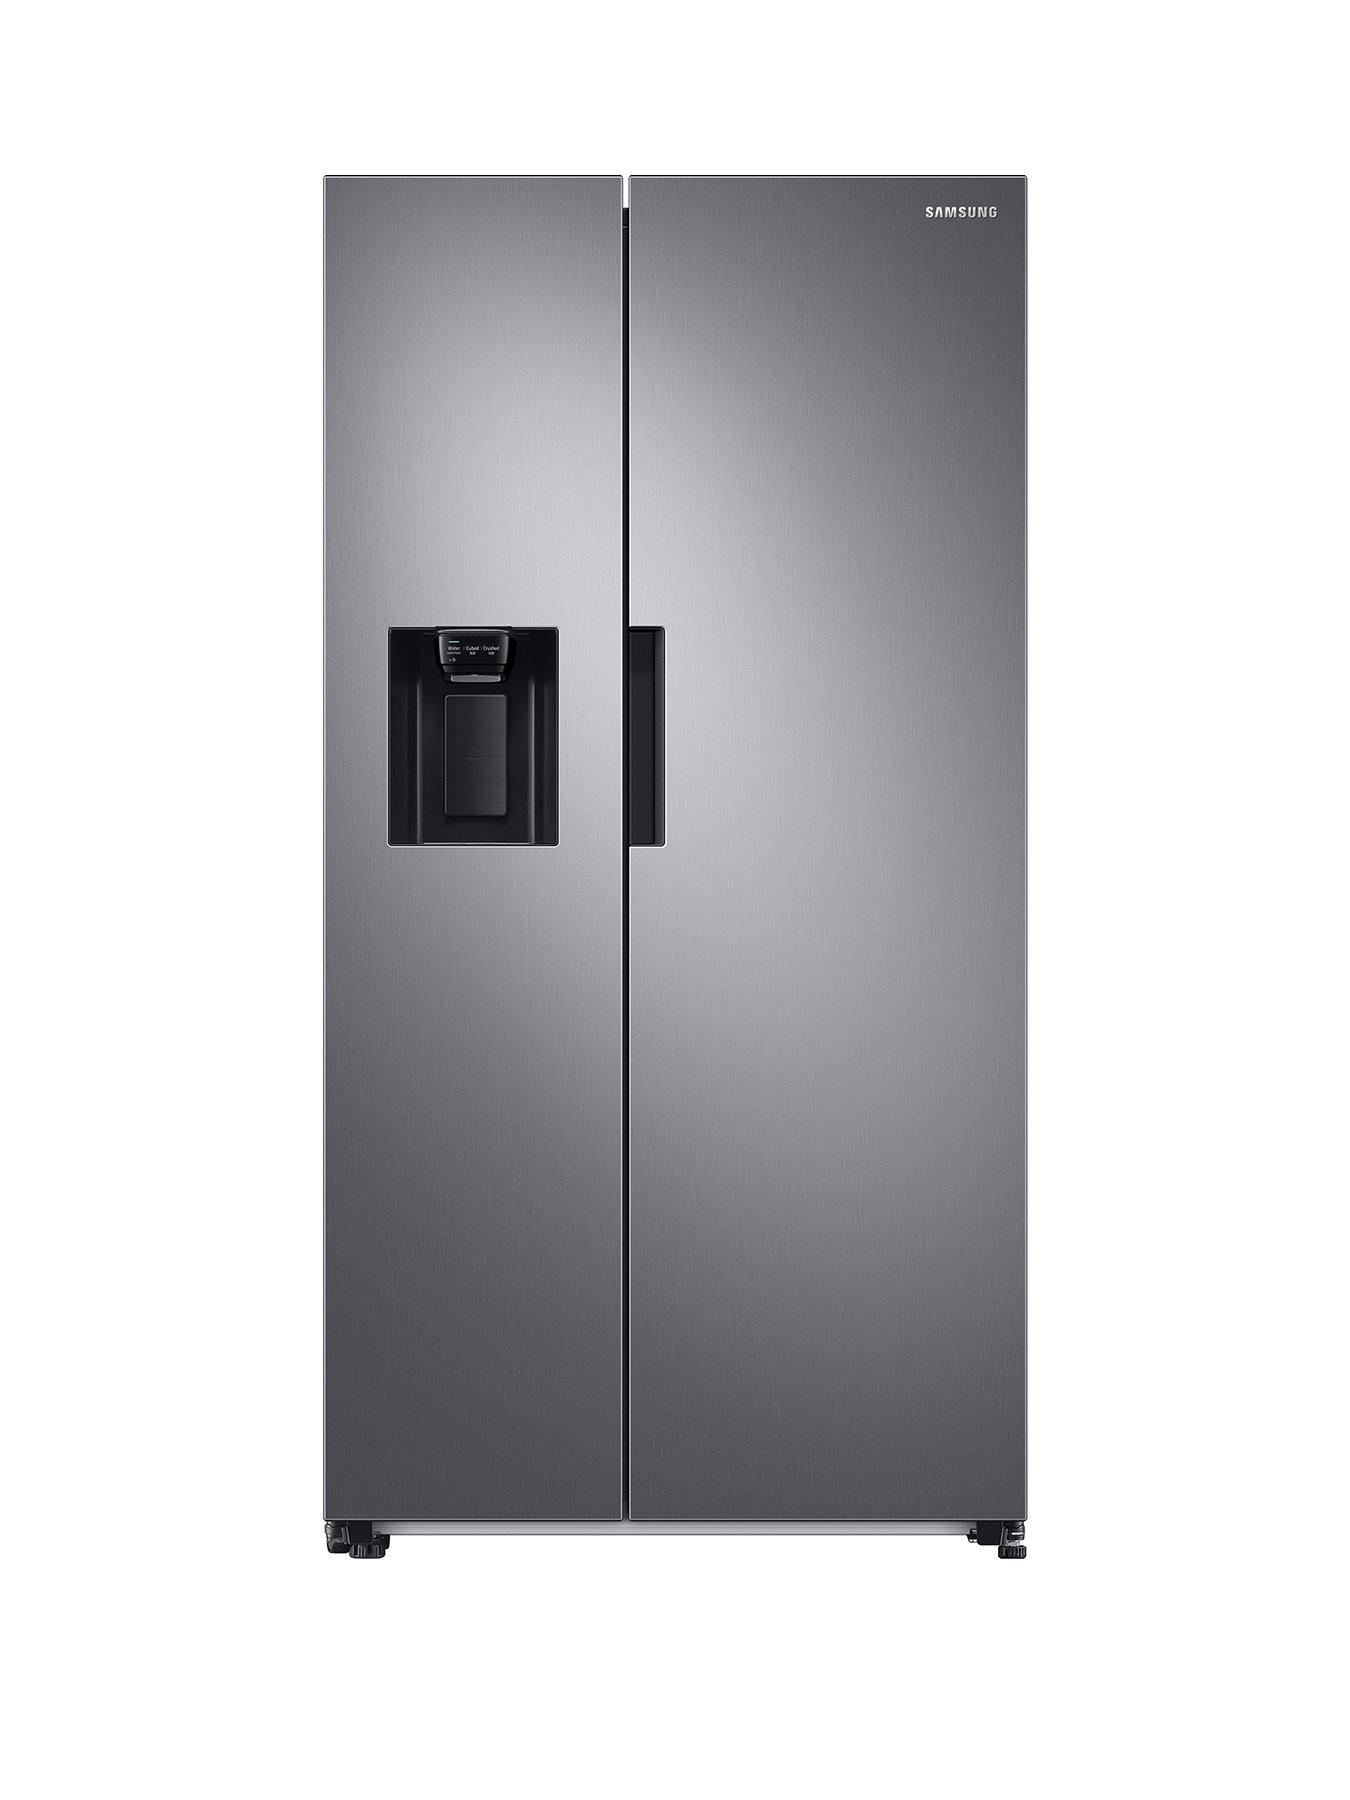 Samsung Series 7 Rs67A8810S9/Eu American Style Fridge Freezer With Spacemax Technology - Matte Stainless